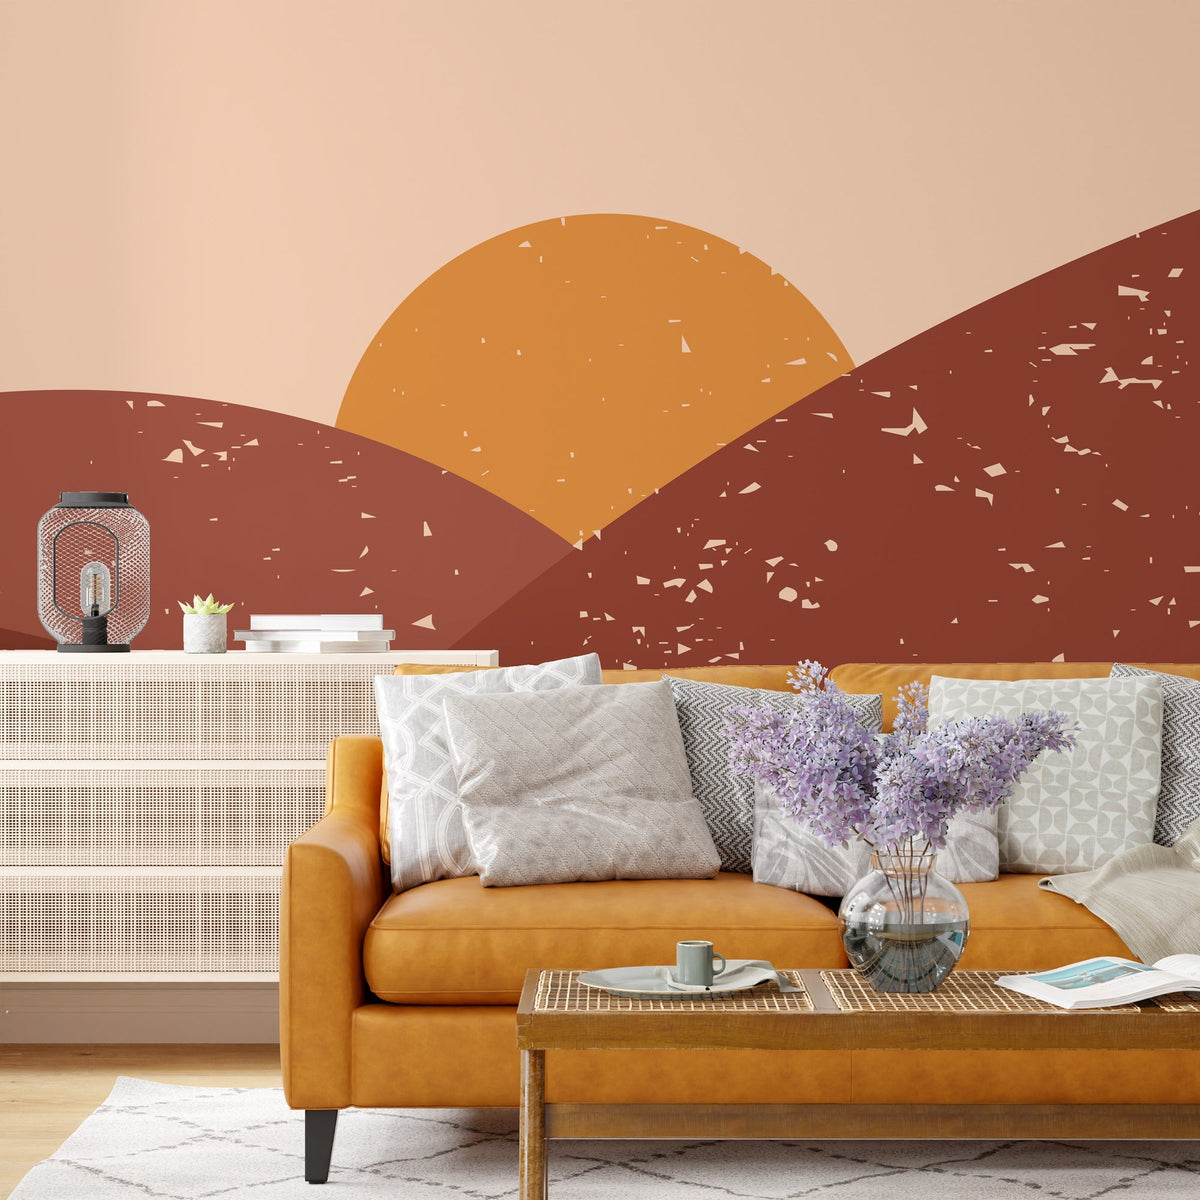 Sunshine Wallpaper Mural: Bring Radiance to Your Space-ChandeliersDecor